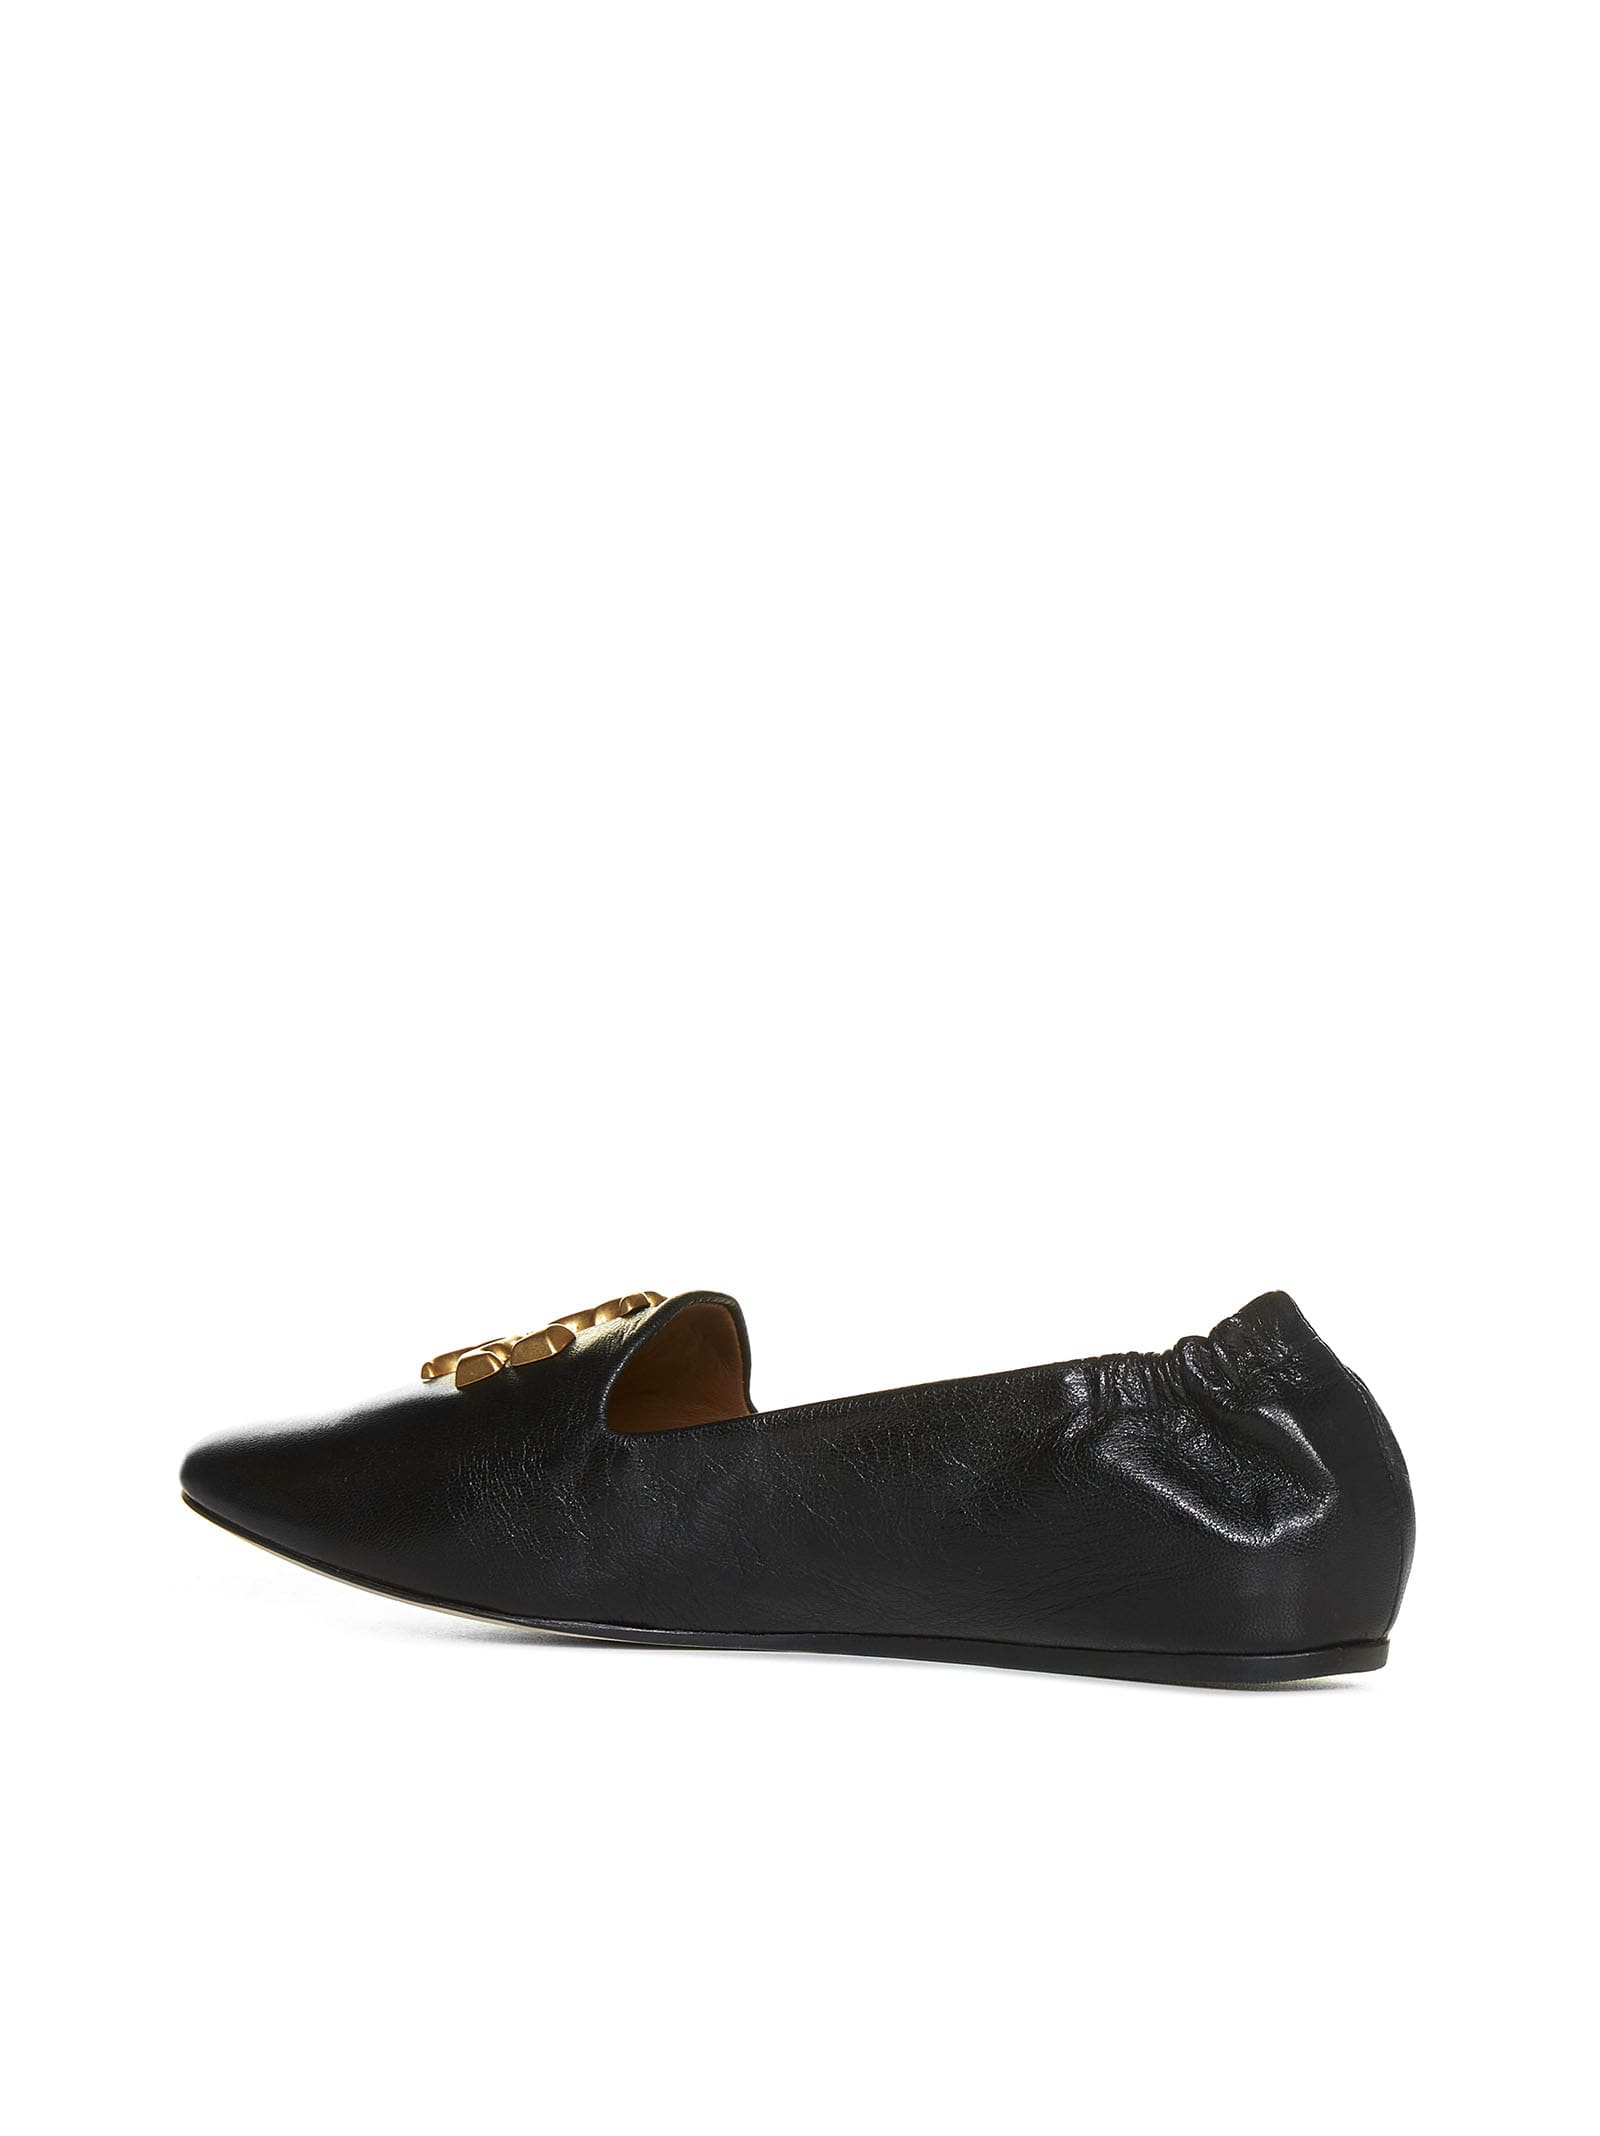 Shop Tory Burch Flat Shoes In Perfect Black